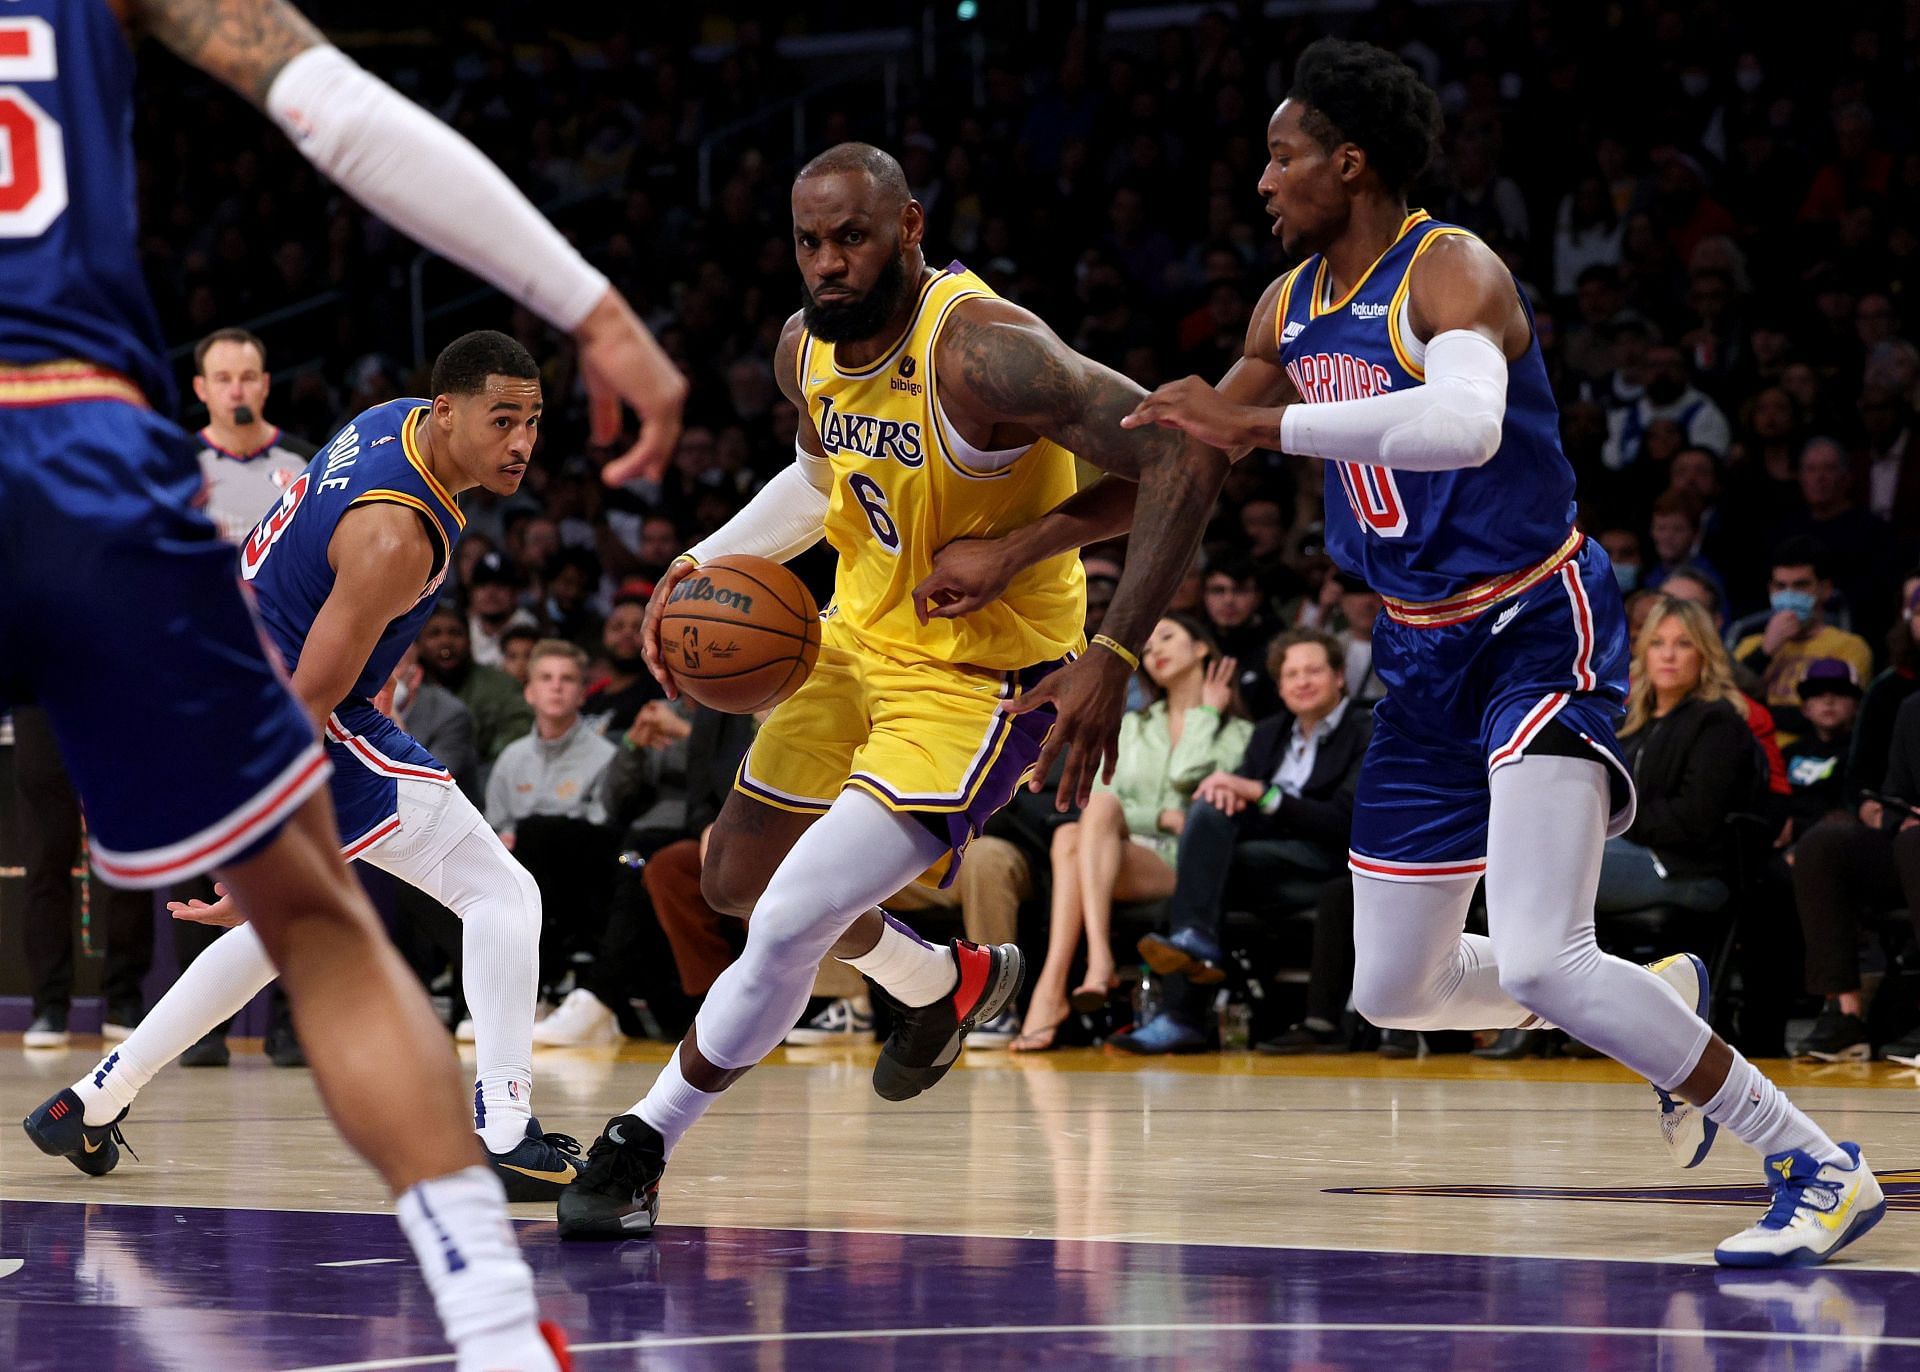 LeBron James #6 of the Los Angeles Lakers drives to the basket between Jonathan Kuminga #00 and Jordan Poole #3 of the Golden State Warriors during a 124-116 Lakers win at Crypto.com Arena on March 05, 2022 in Los Angeles, California.